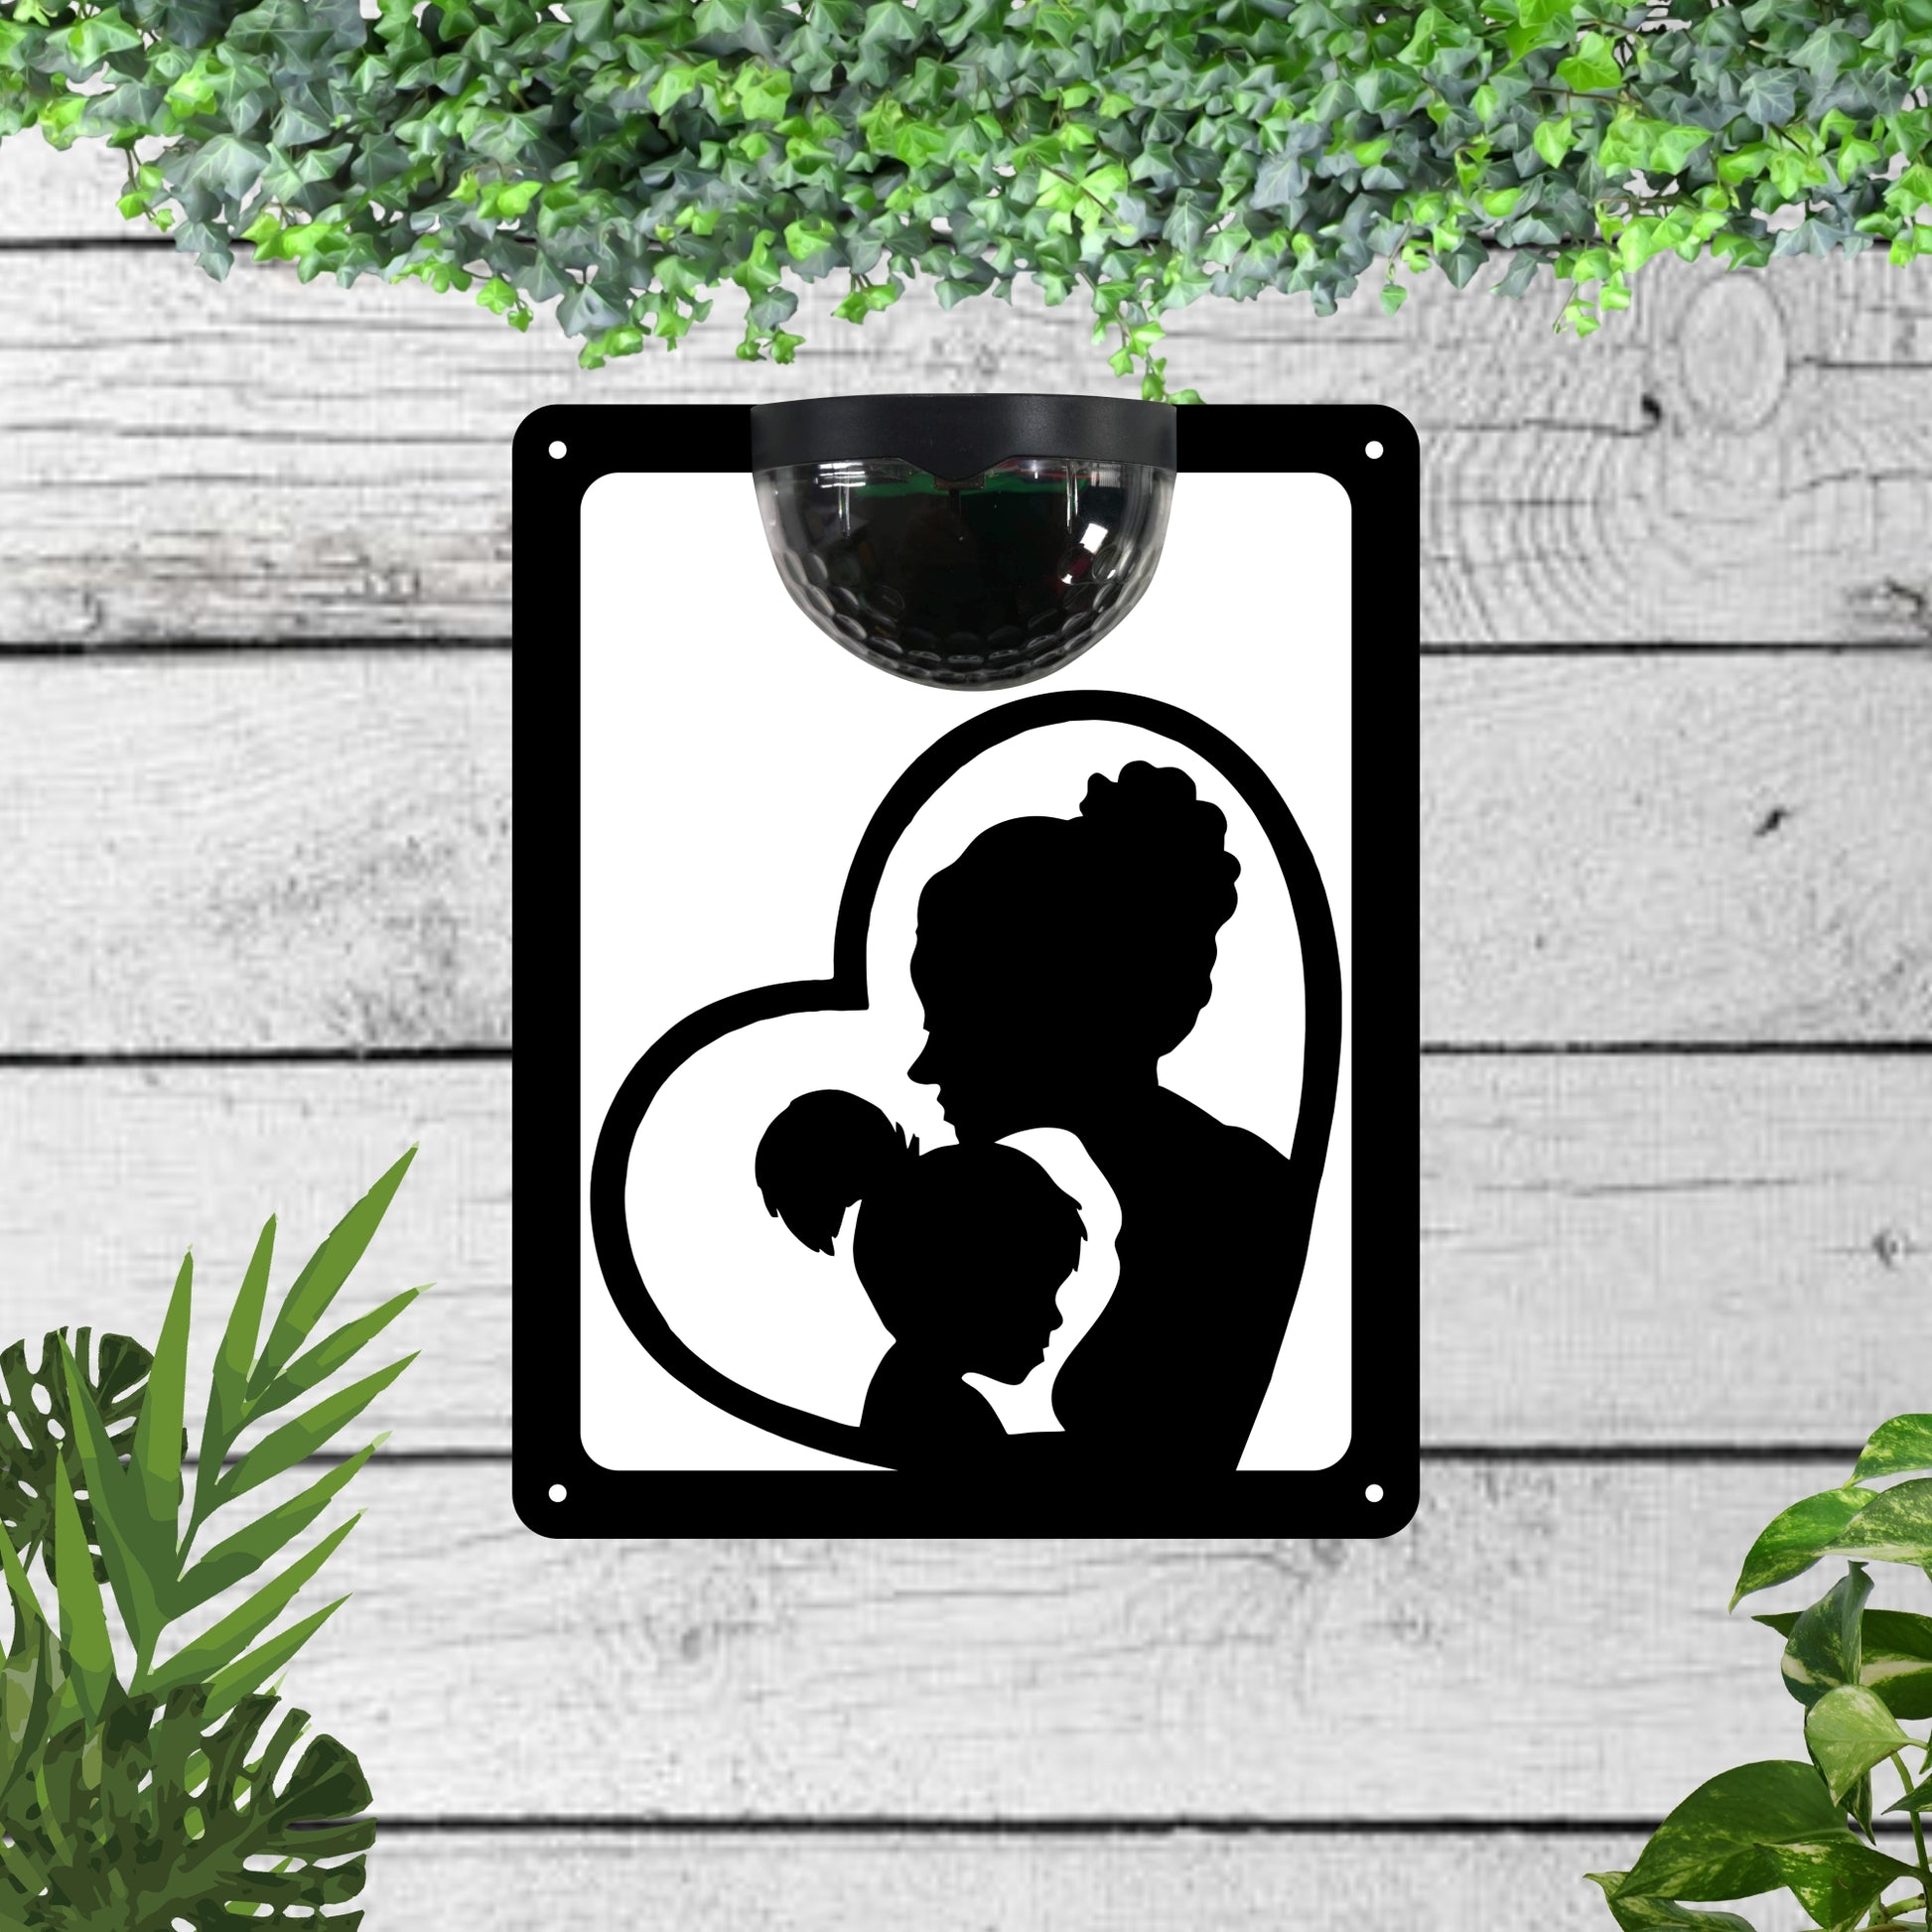 Garden Solar Light Wall Plaque With Mum And Child in a Heart | John Alans